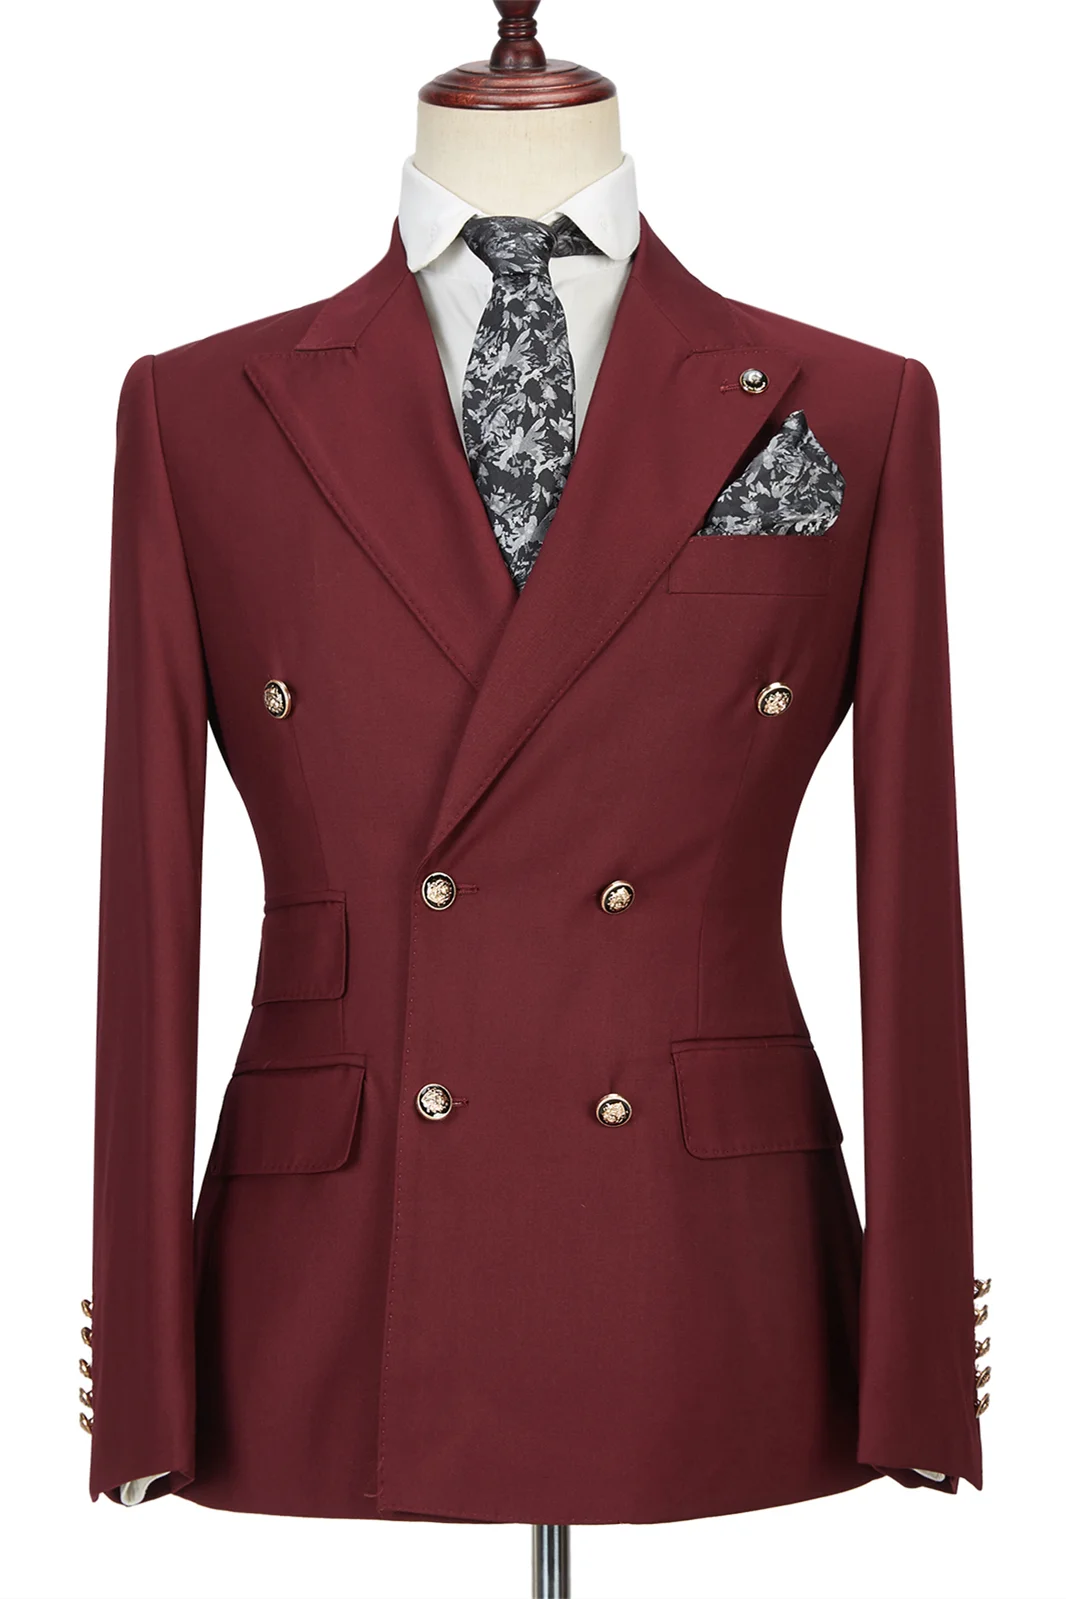 Daisda Glamorous Burgundy Groomsmen Outfits Peak Lapel With Double Breasted  